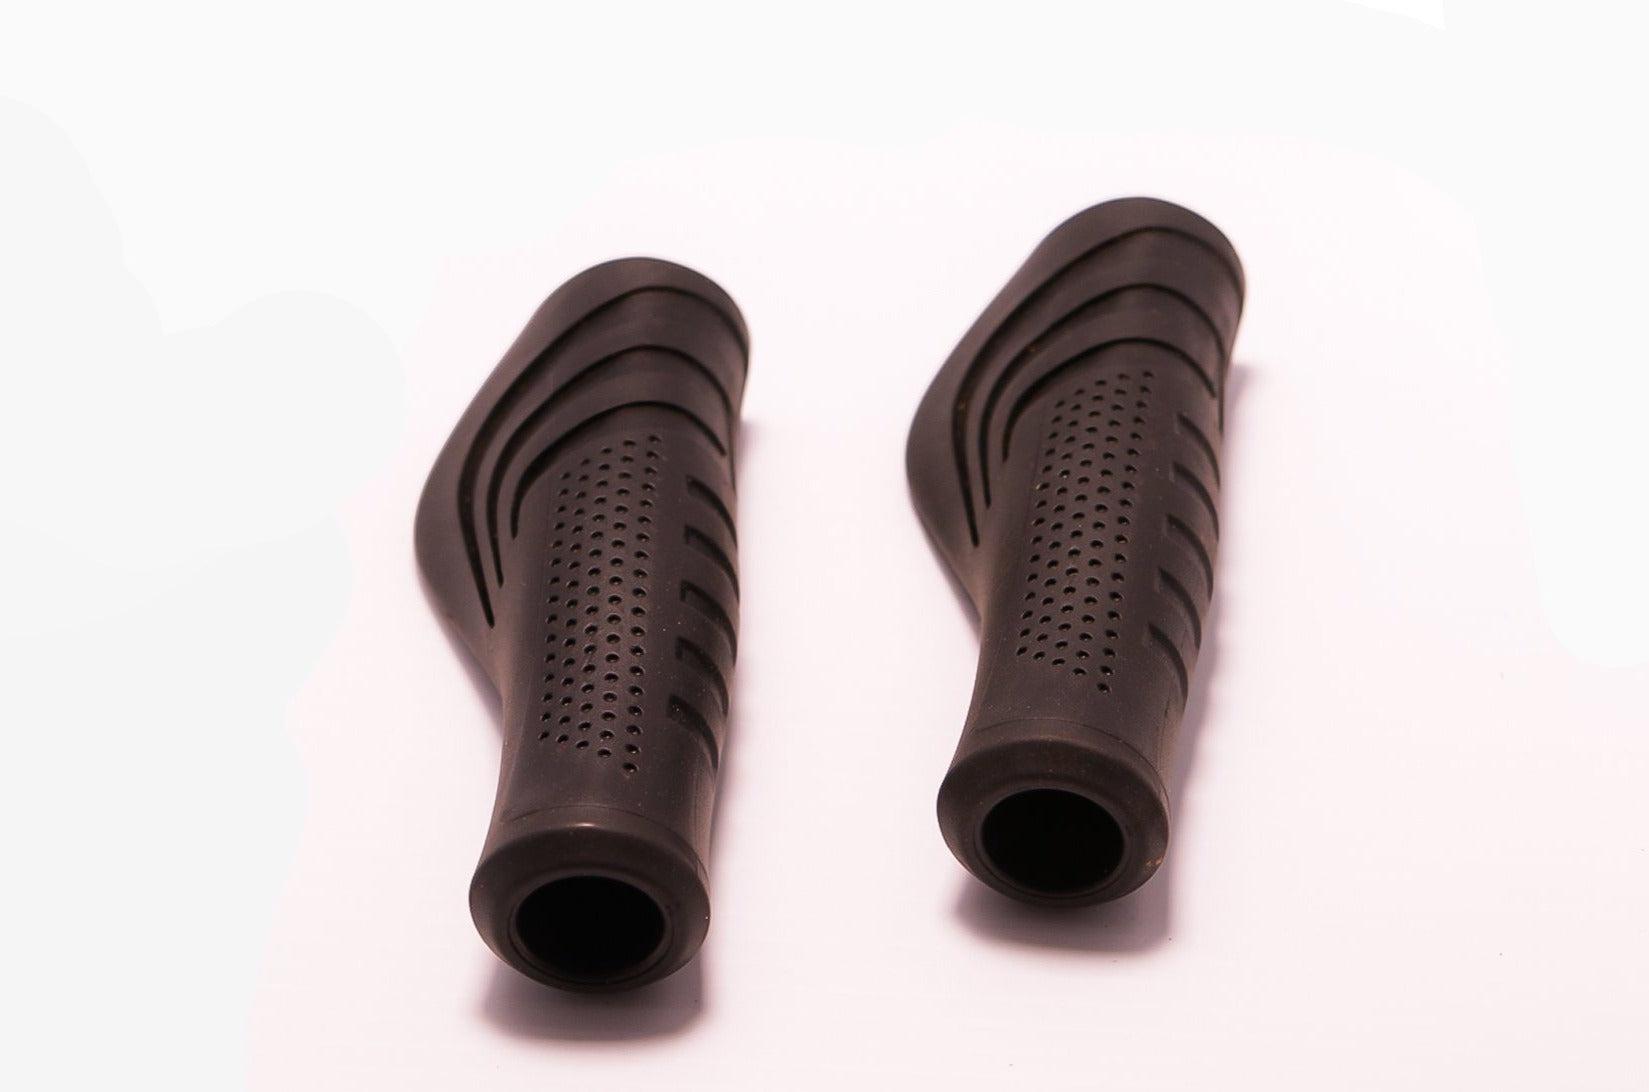 1Pair Bicycle Handlebar Grips, Ergonomic Design Rubber Anti-Slip Cycling Hand Grip Protector - e4cents